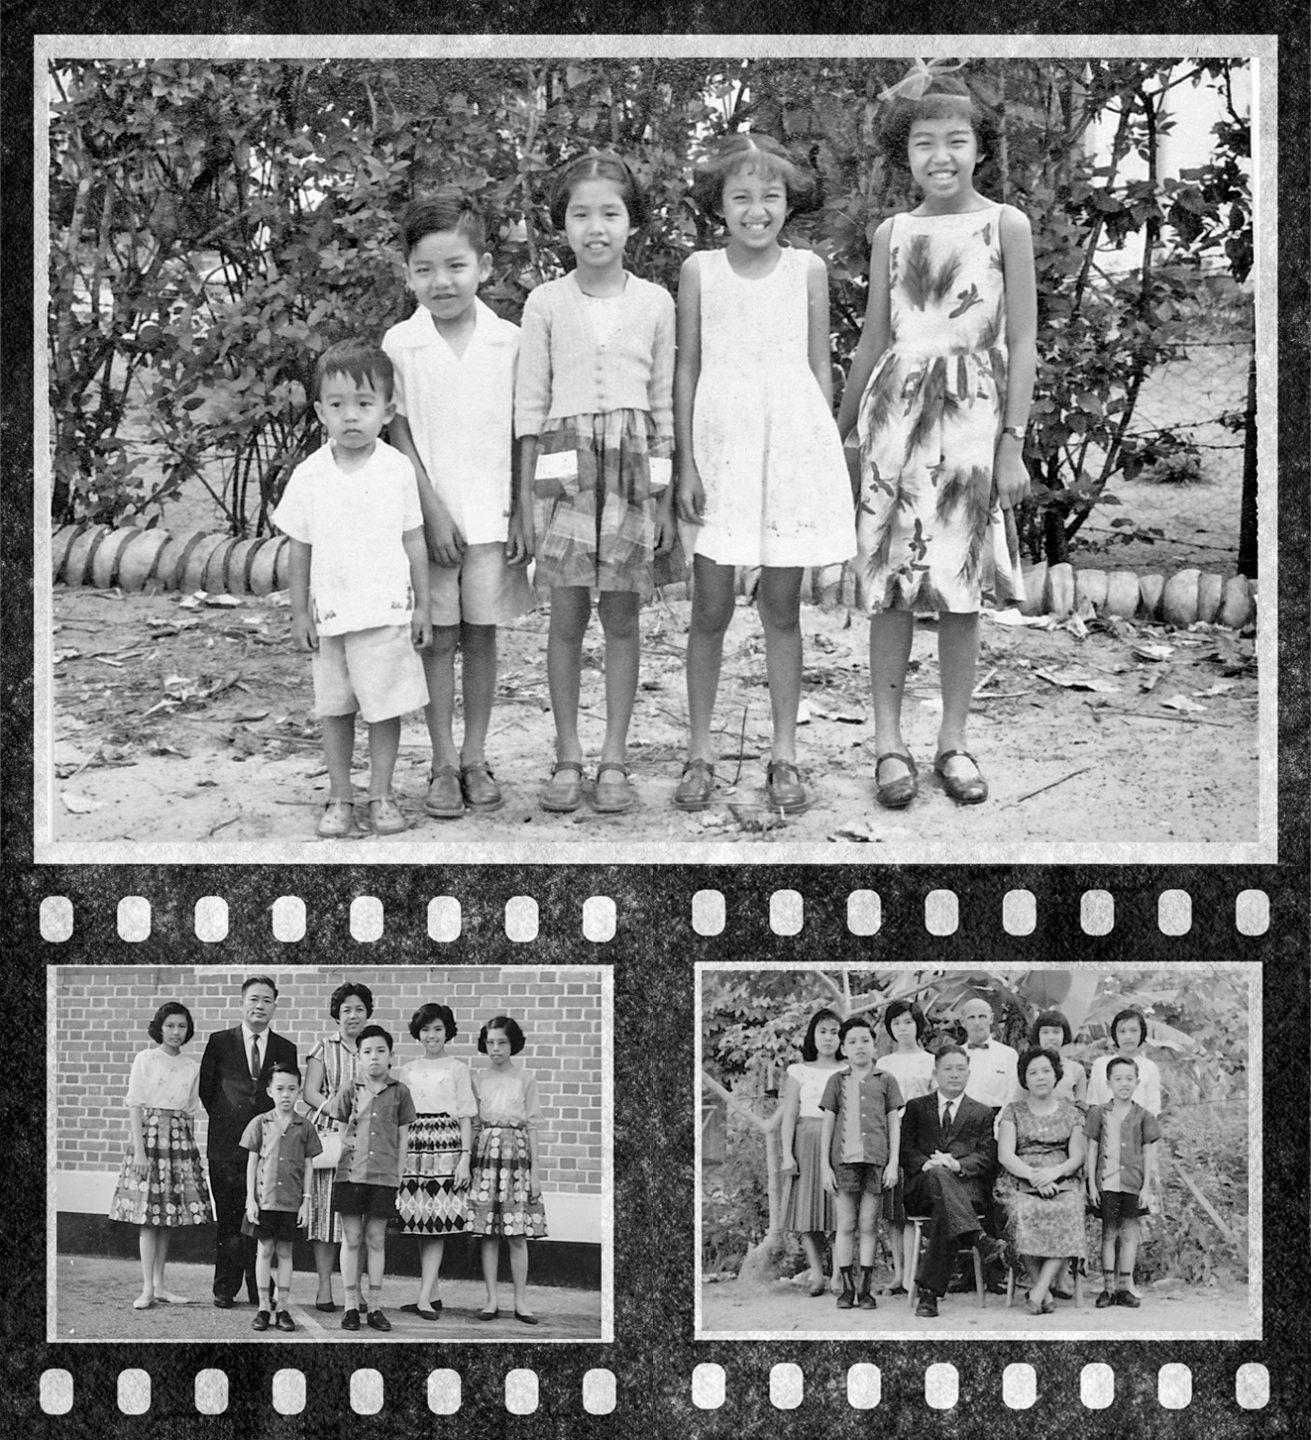 Clockwise from top: The five Yap siblings during childhood; The Yap family with Jimmy Glover; Yap family portrait.